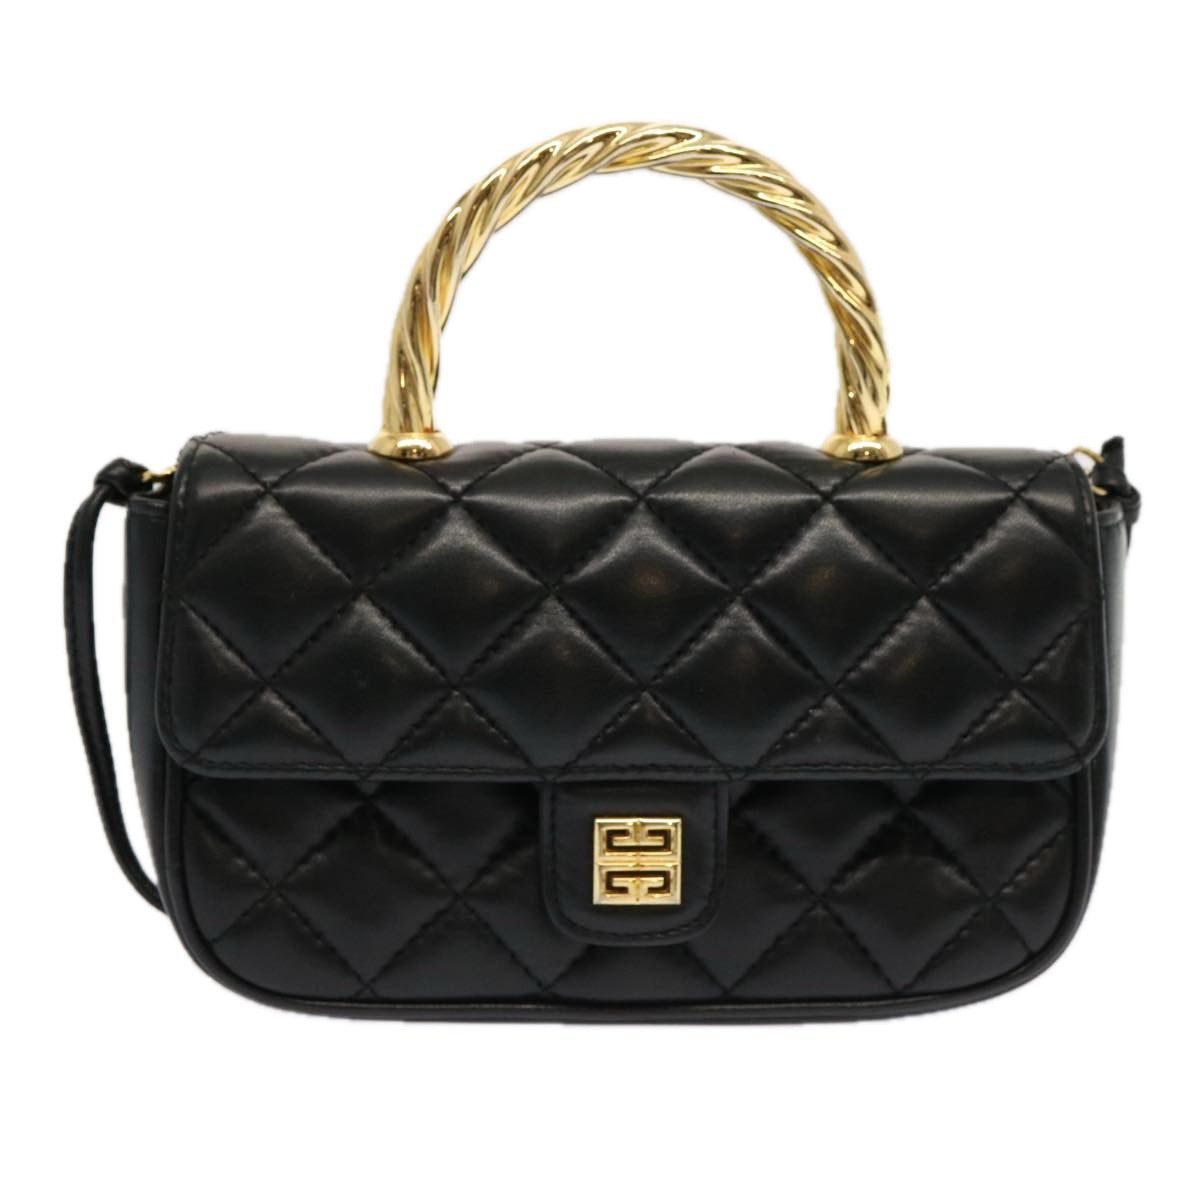 GIVENCHY Hand Bag Leather 2way Black Auth 69502A - 0